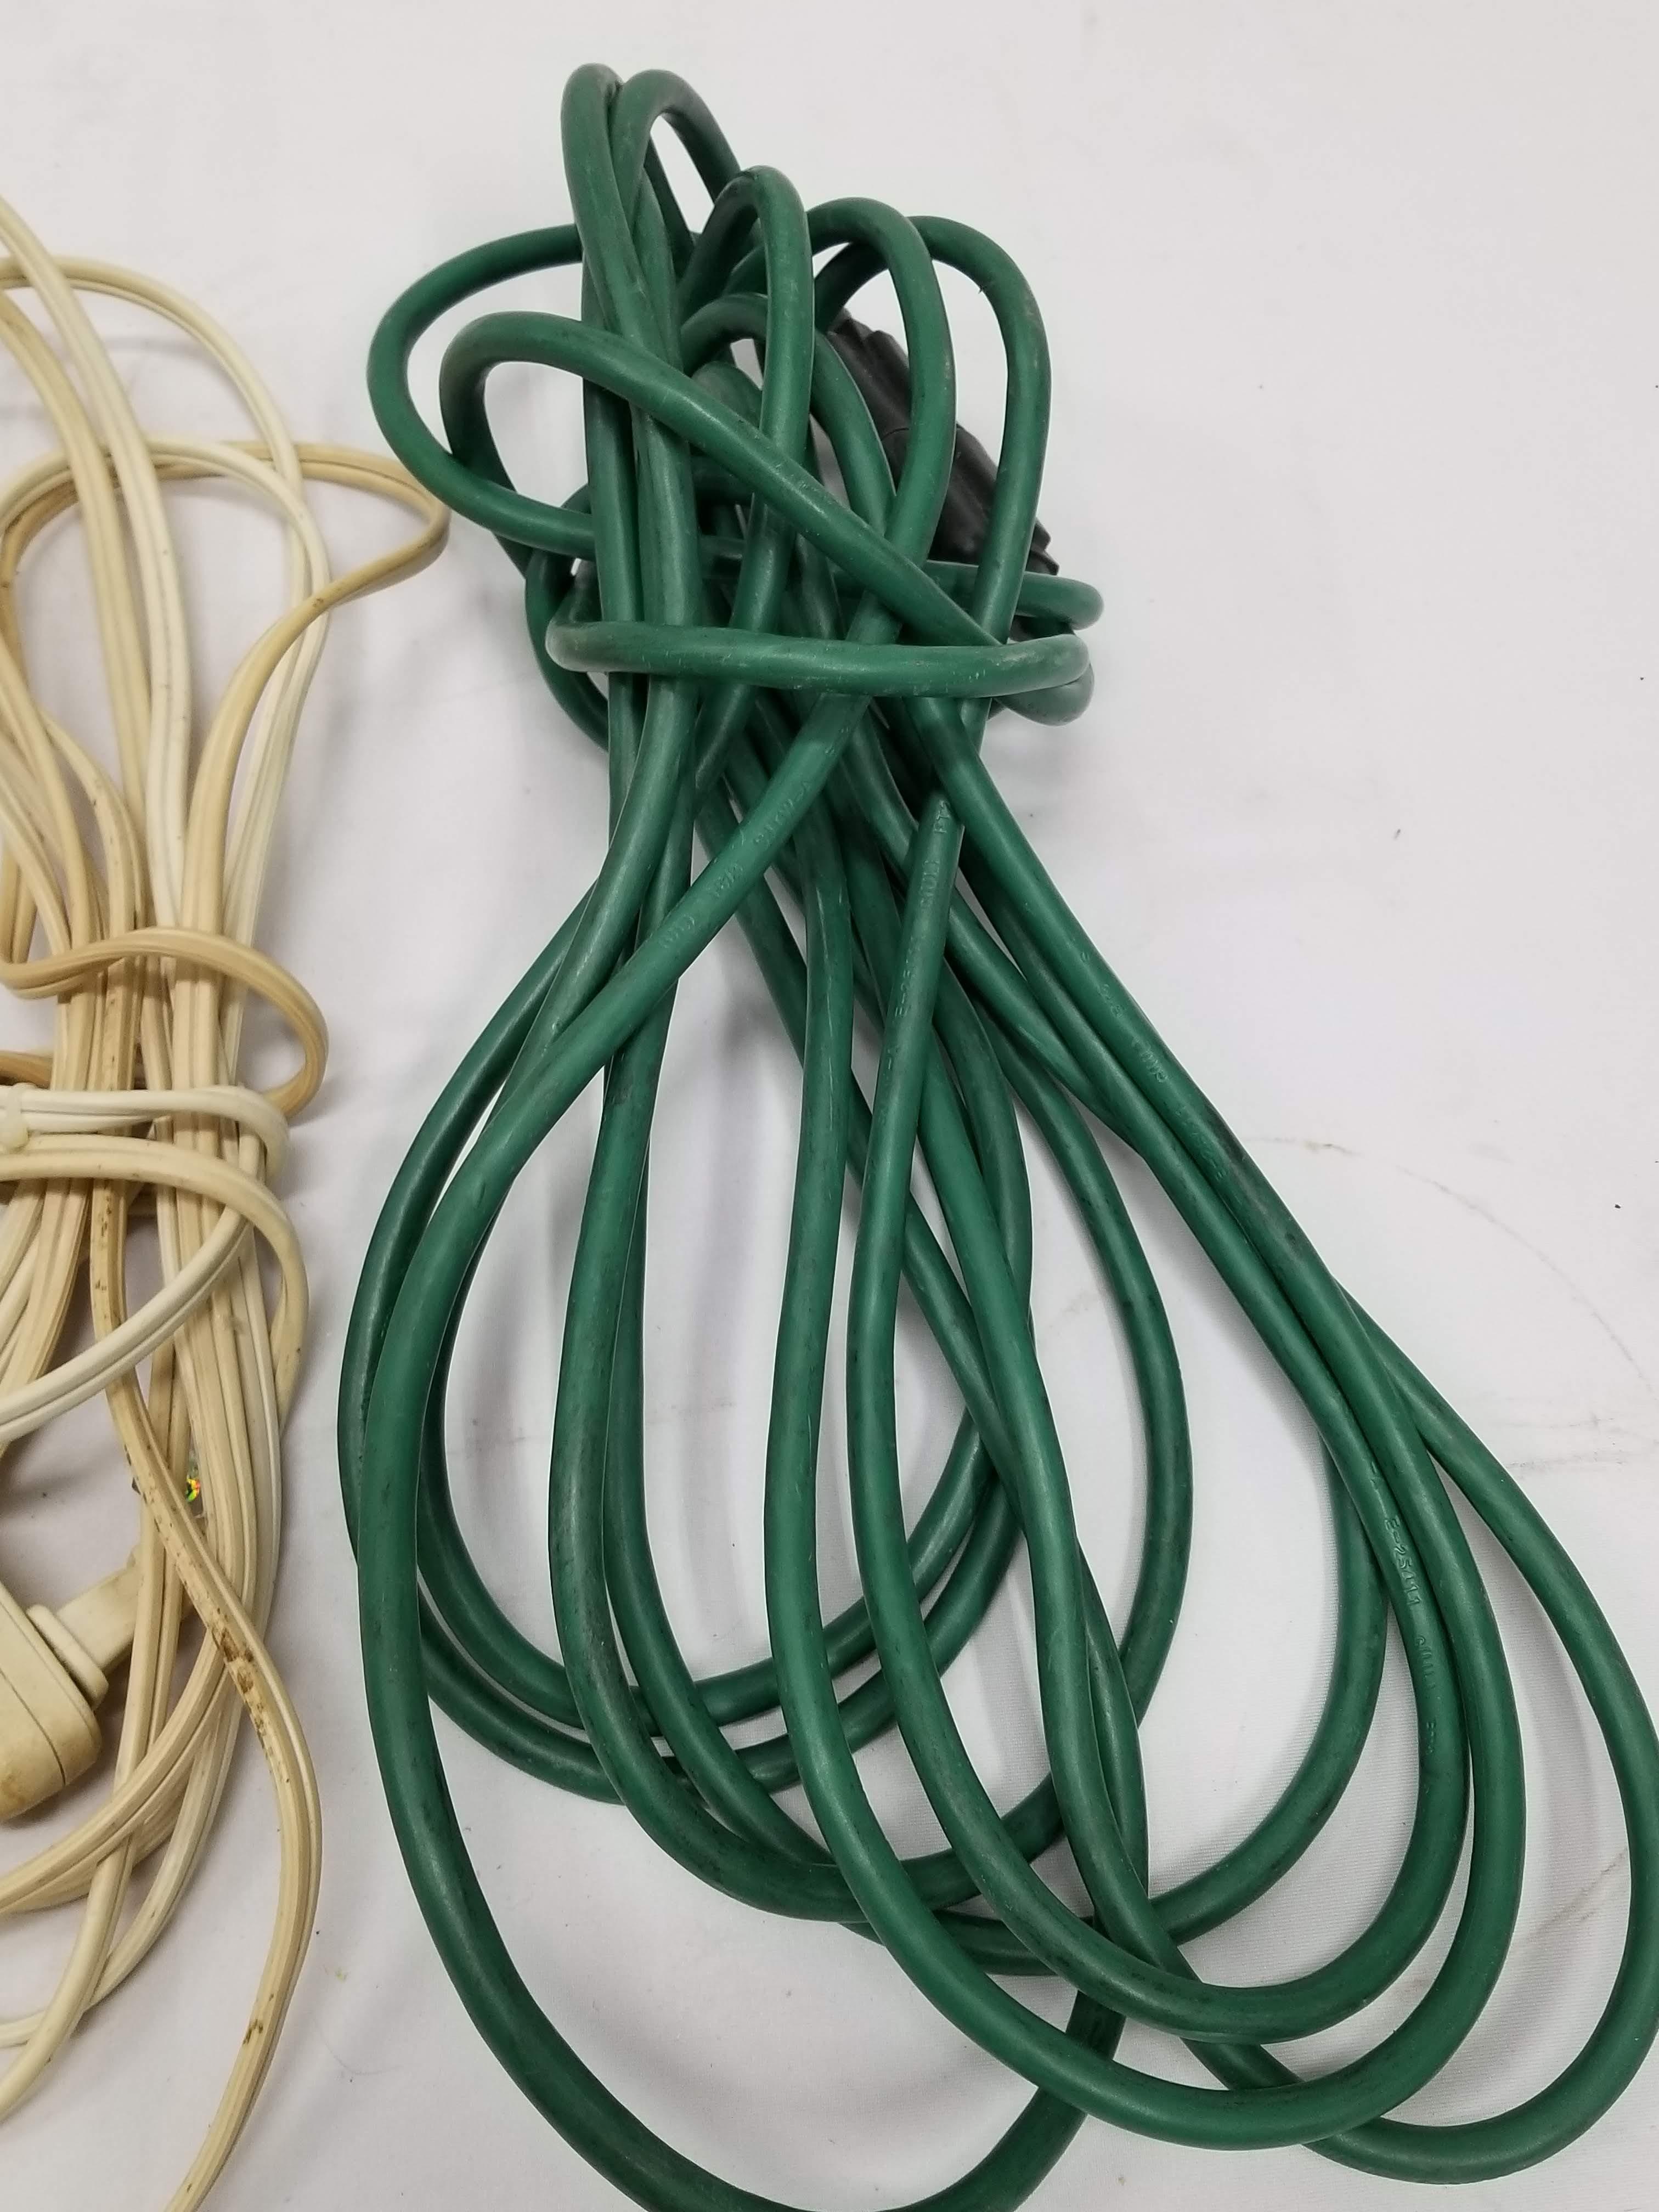 5 Extension Cables: Four 2-Prong, One 3-Prong - Varying Lengths